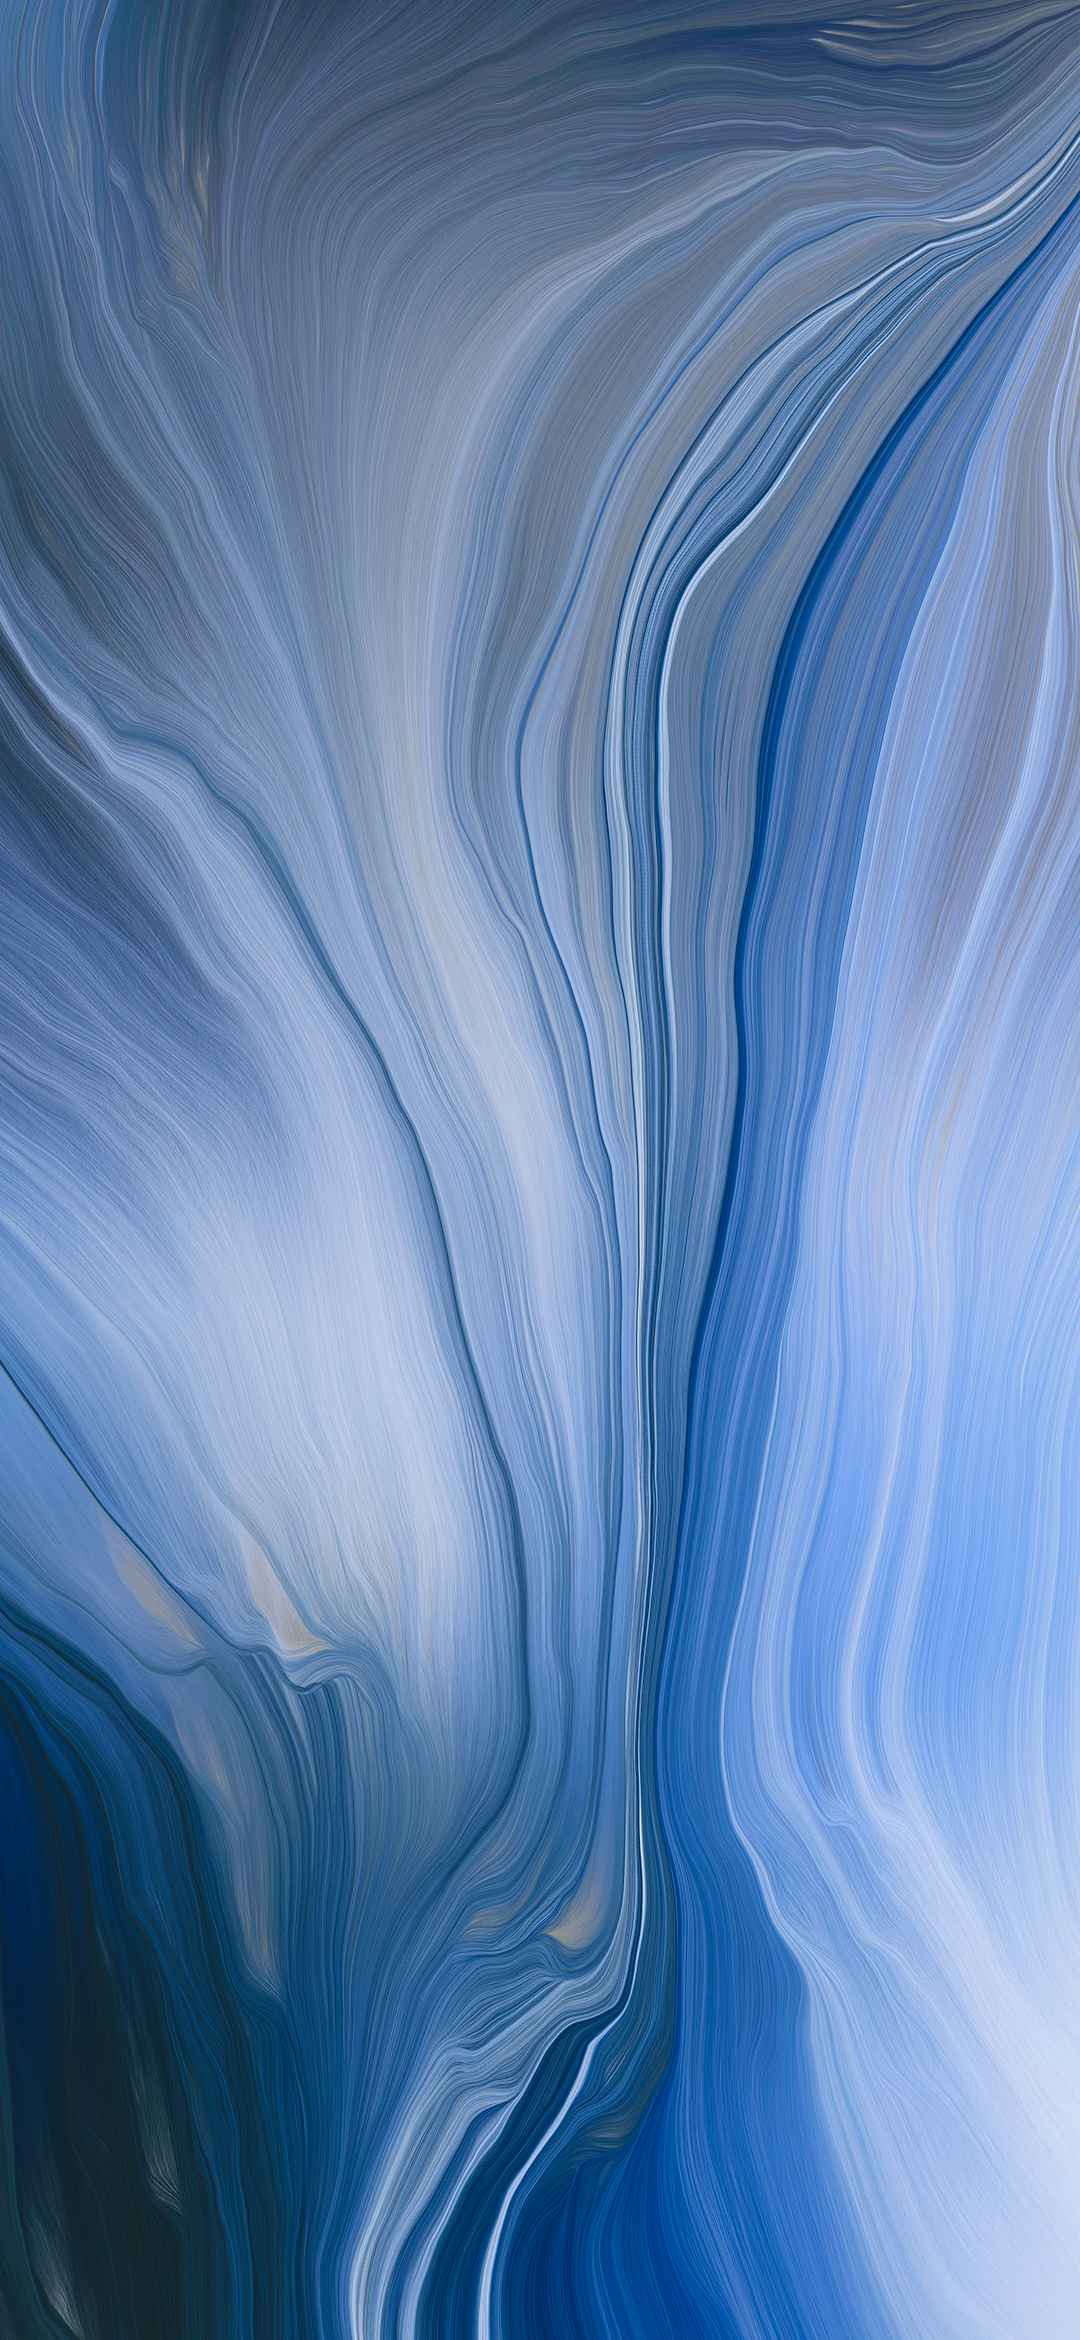 Oppo Reno Stock Wallpapers Download (Full HD+) - DroidViews